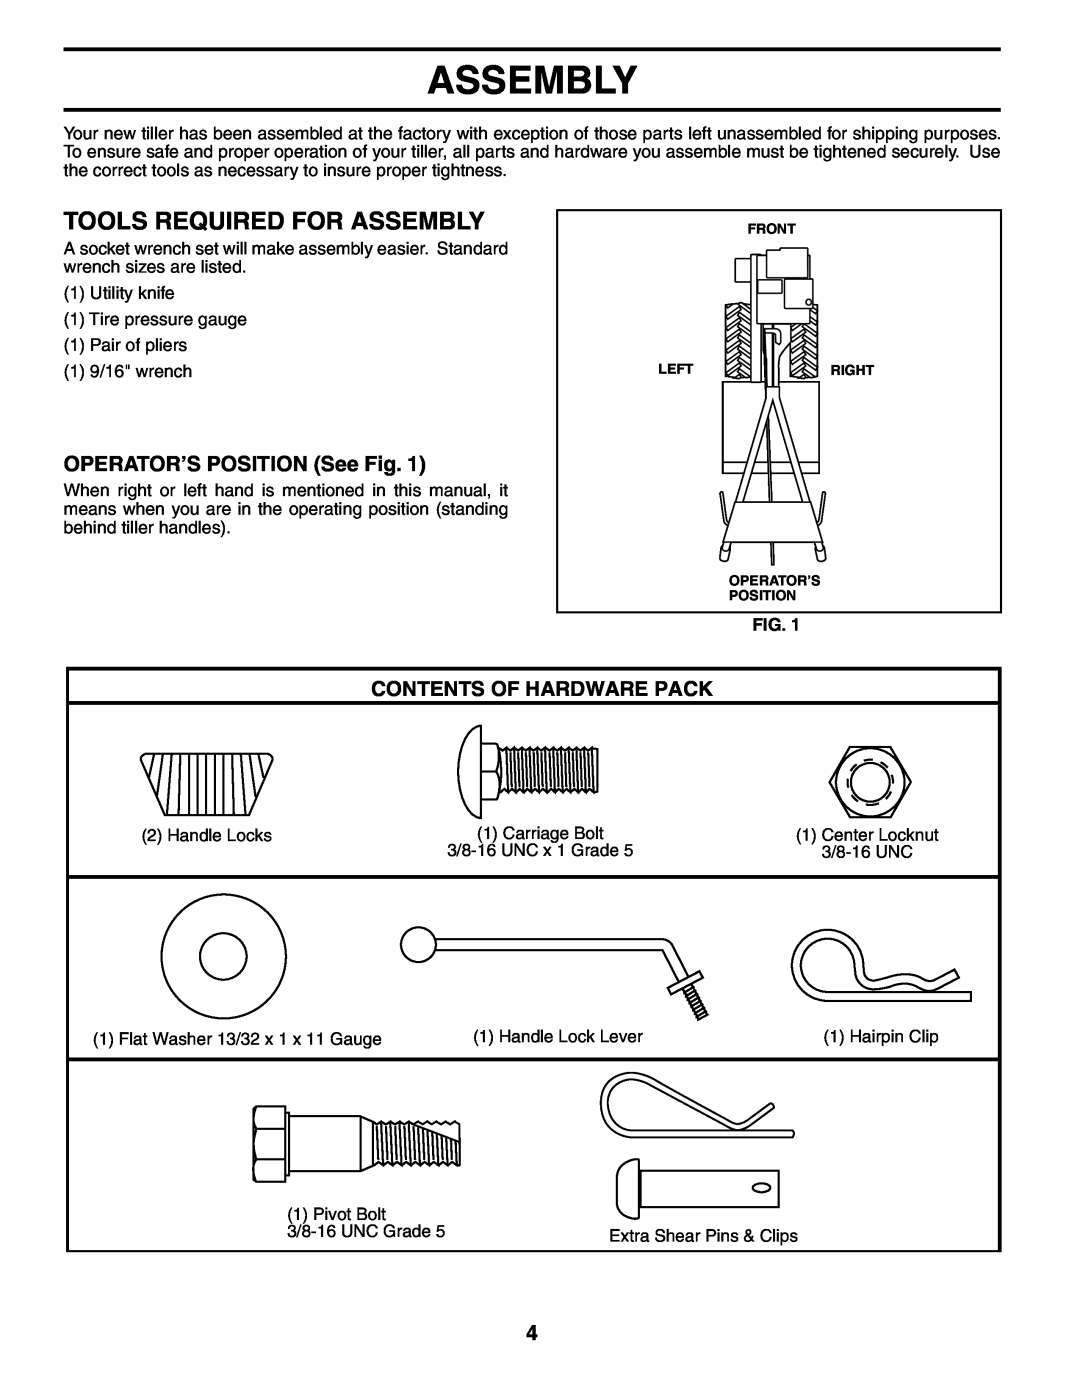 Weed Eater WET6500A owner manual Tools Required For Assembly, OPERATOR’S POSITION See Fig, Contents Of Hardware Pack 